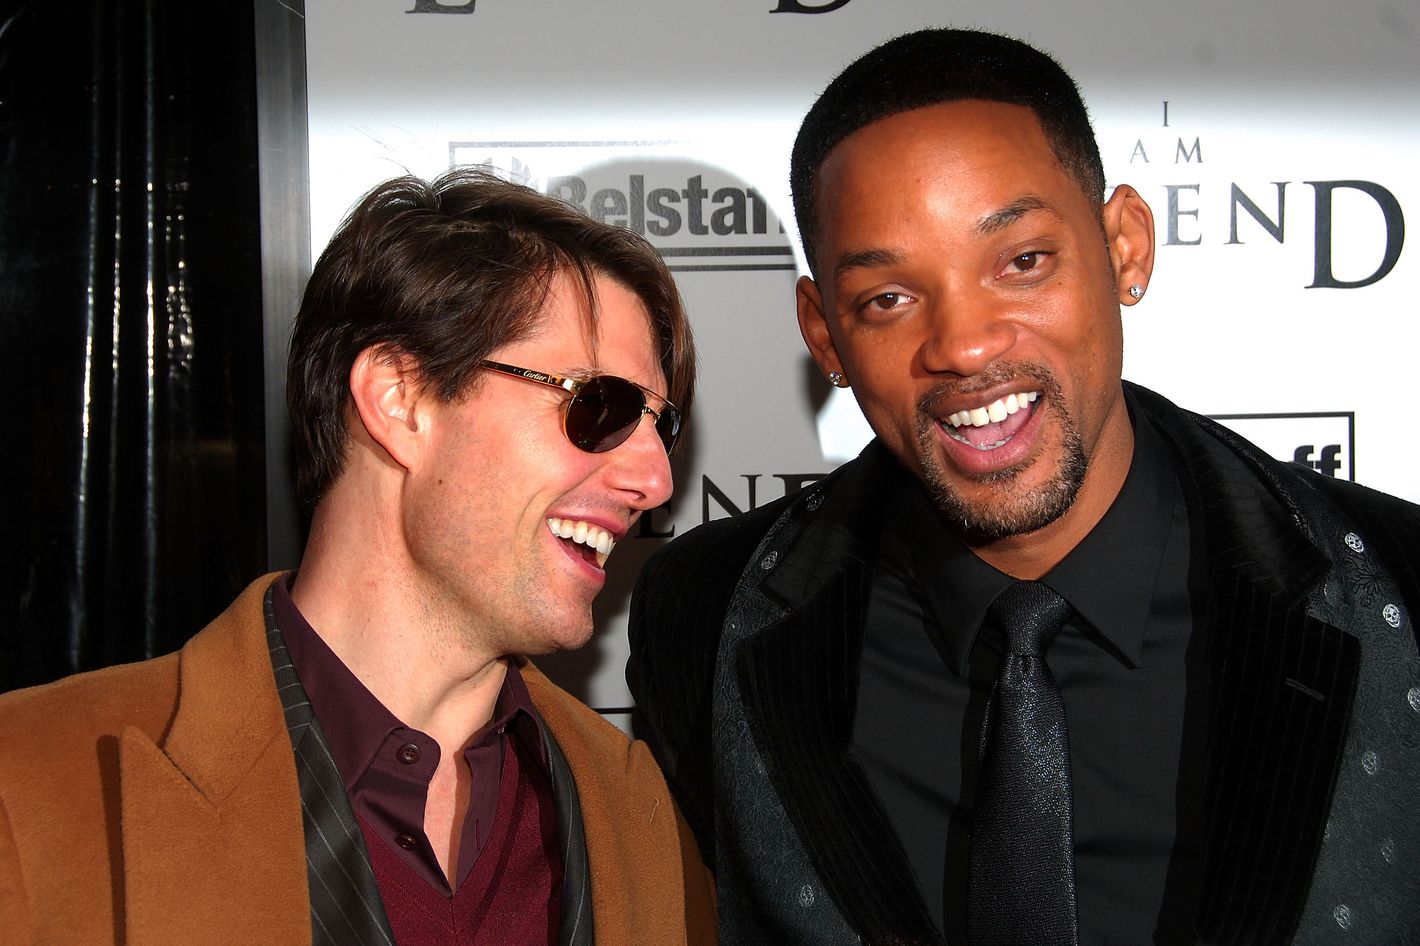 6 Things Will Smith Can Learn From Tom Cruise Following the Failure of After Earth